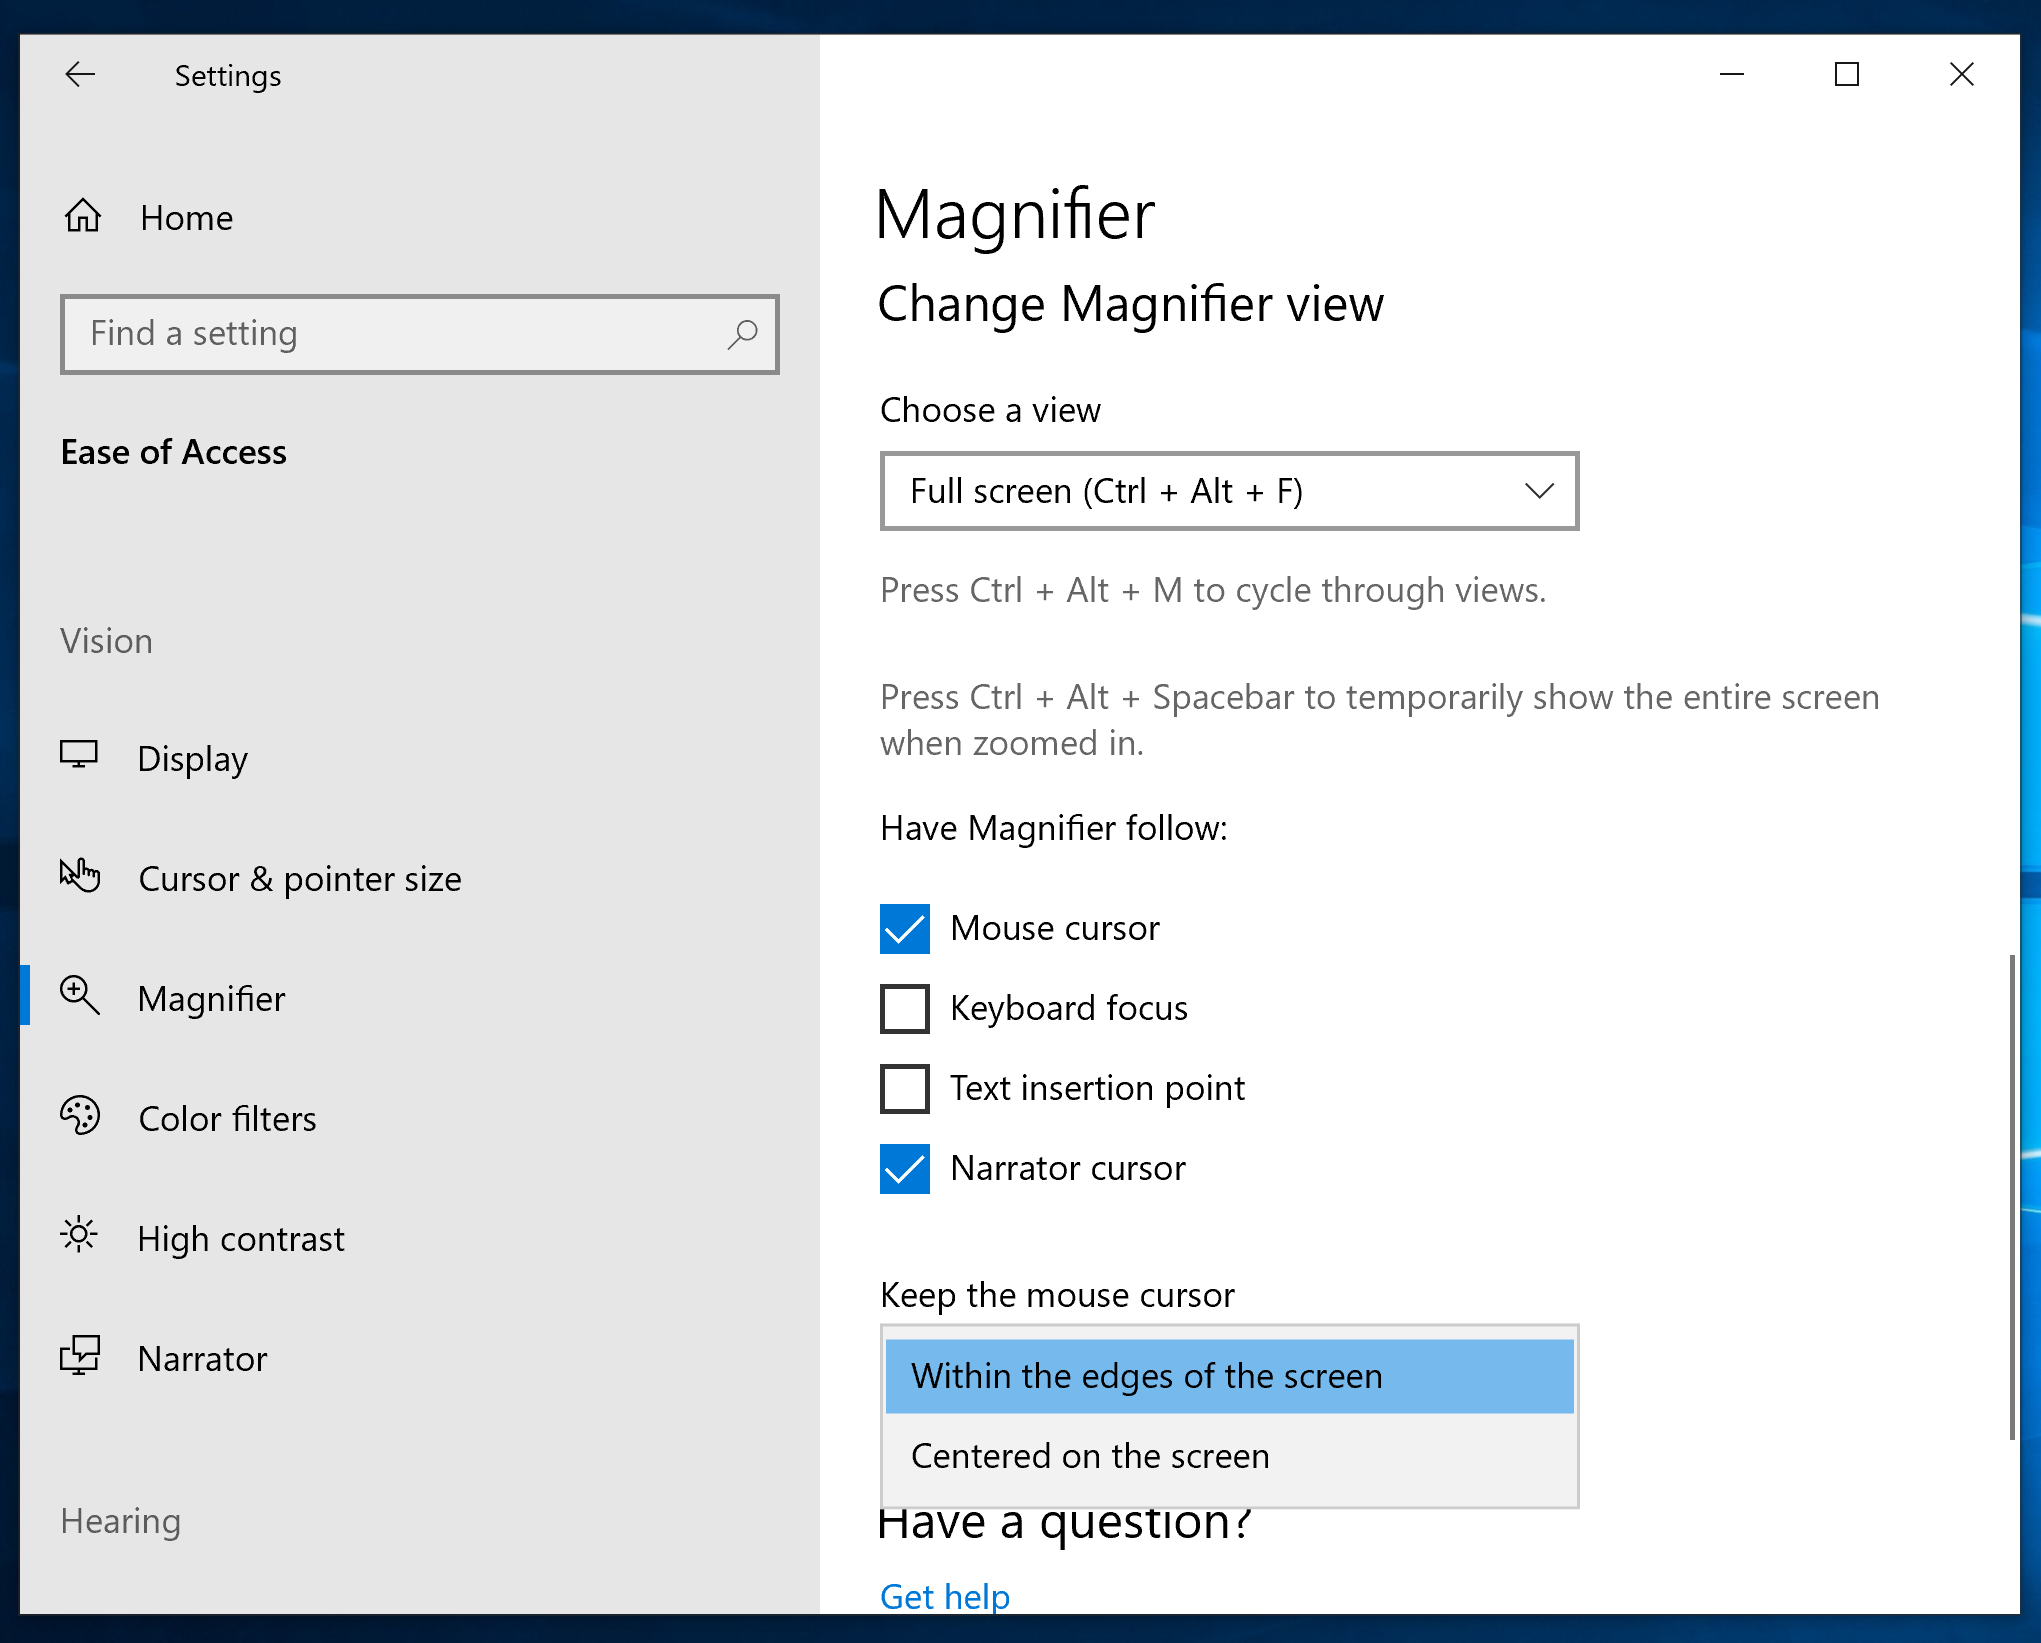 Magnifier settings, Keep the mouse cursor, centered on the screen option.